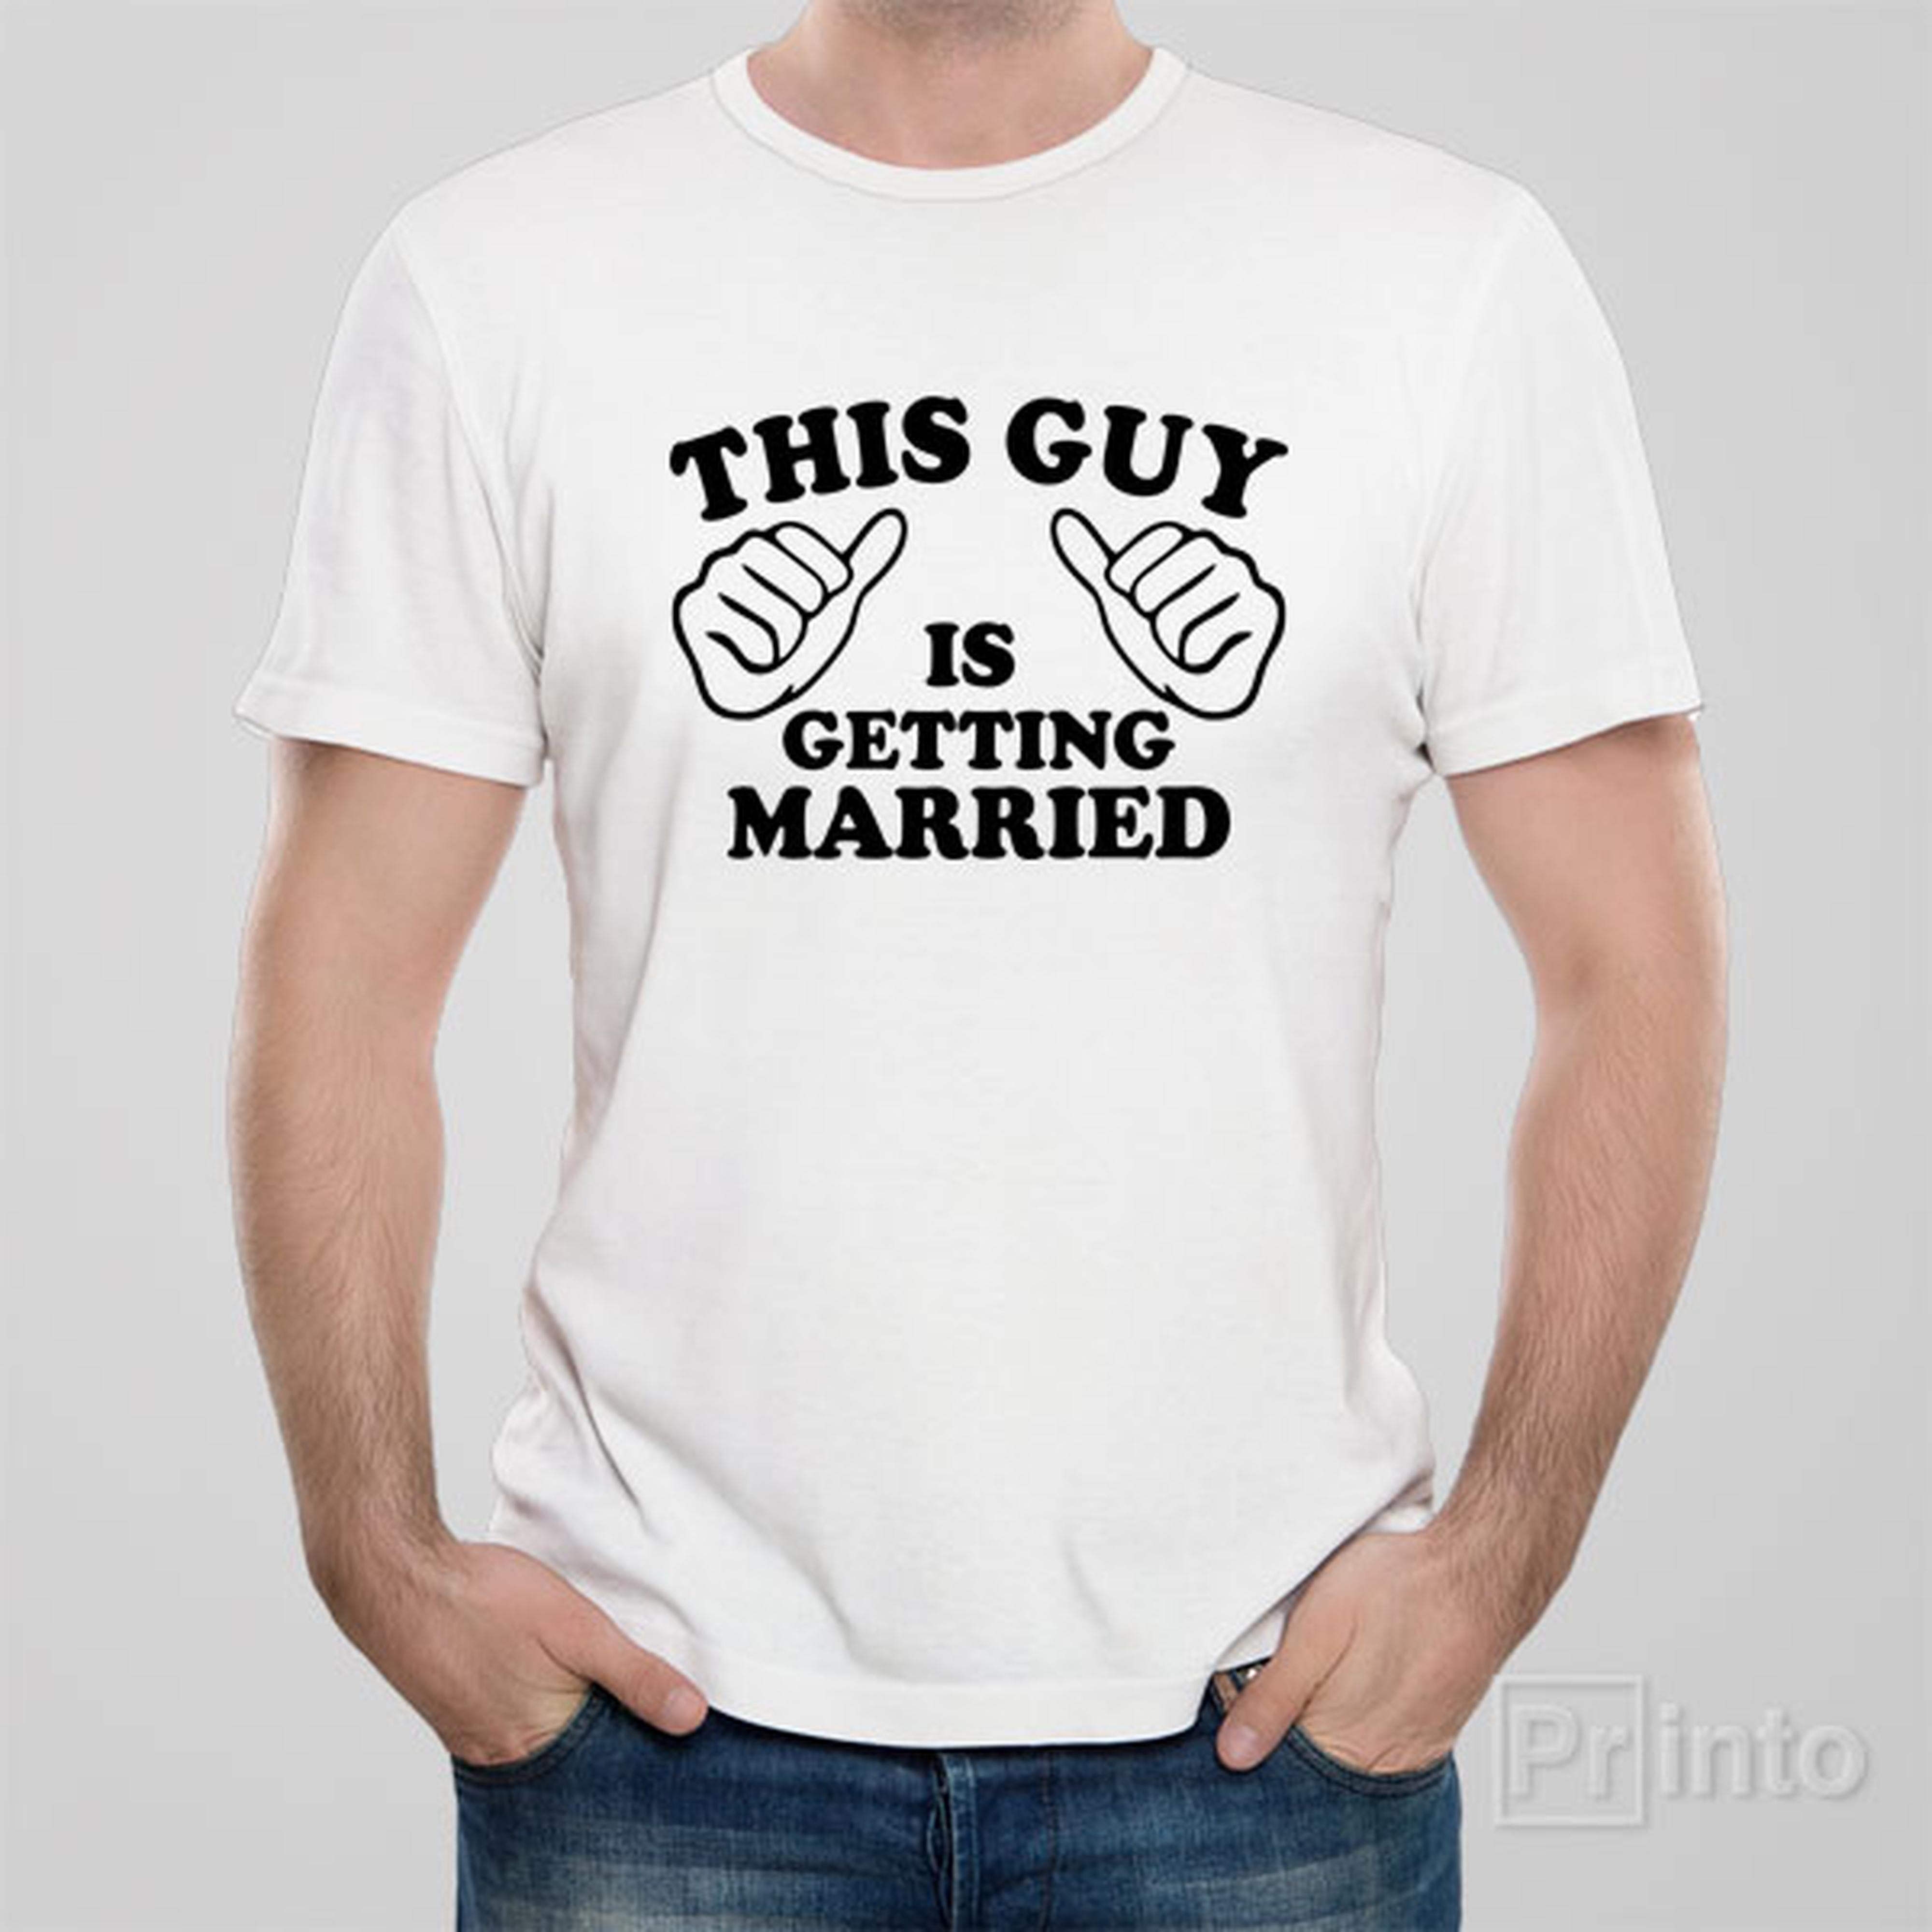 this-guy-is-getting-married-t-shirt